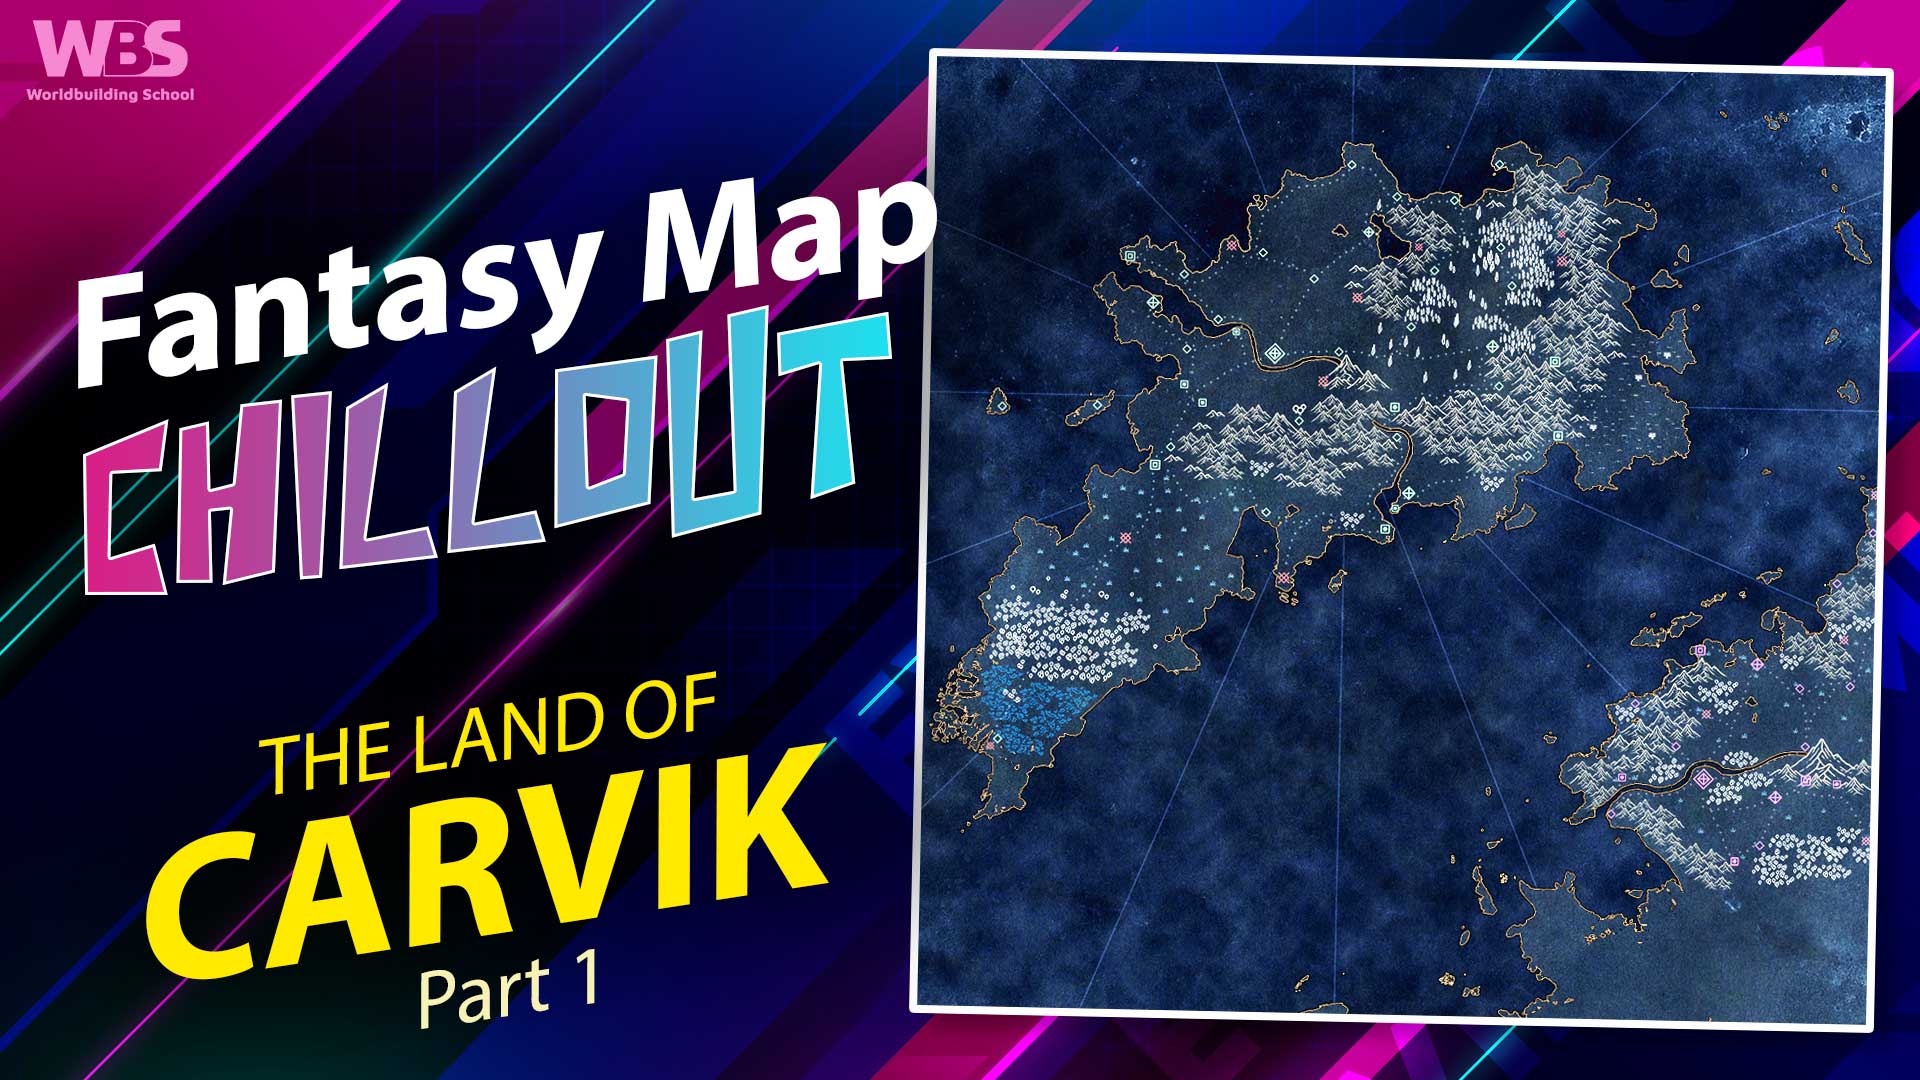 Fantasy Map Chillout - How to draw Carvik part 1